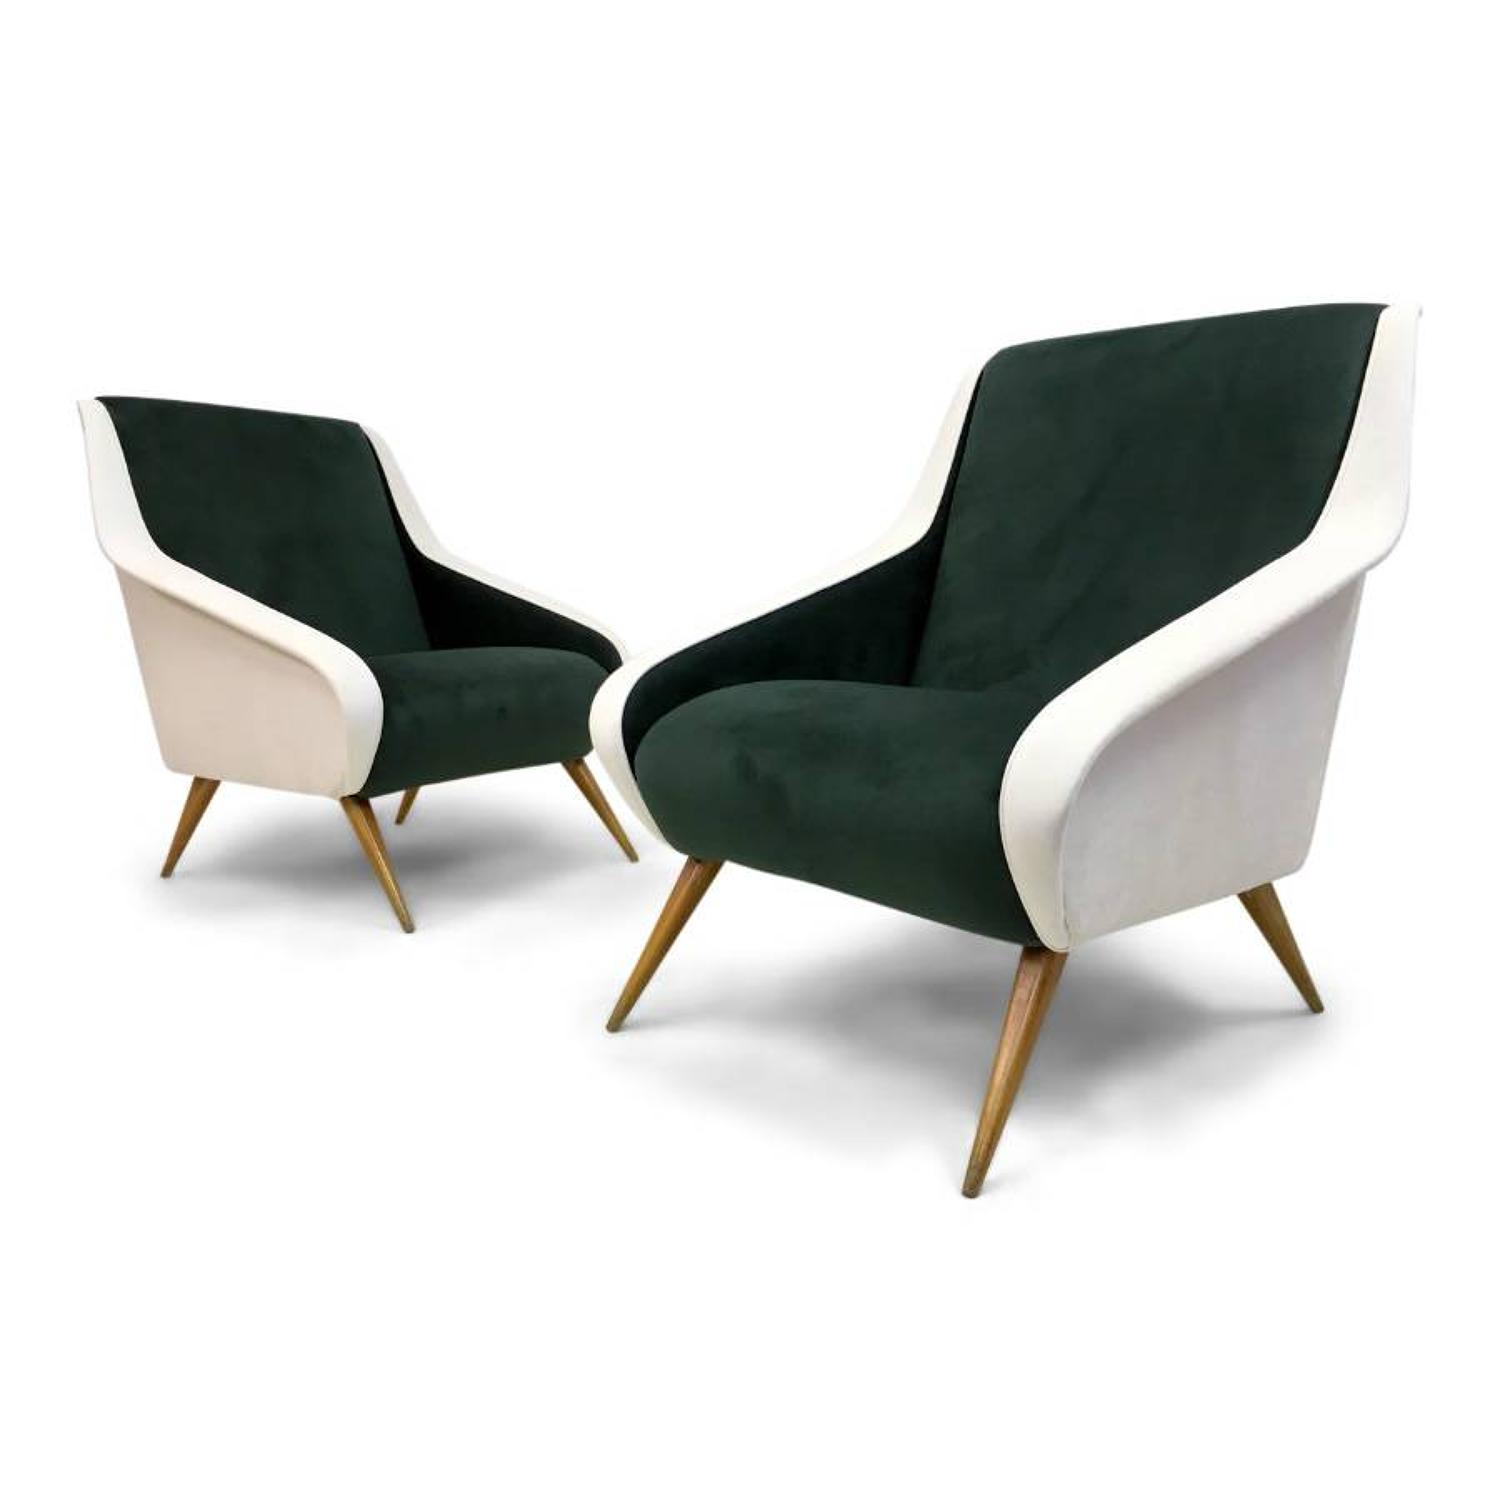 A pair of Italian green and white velvet armchairs